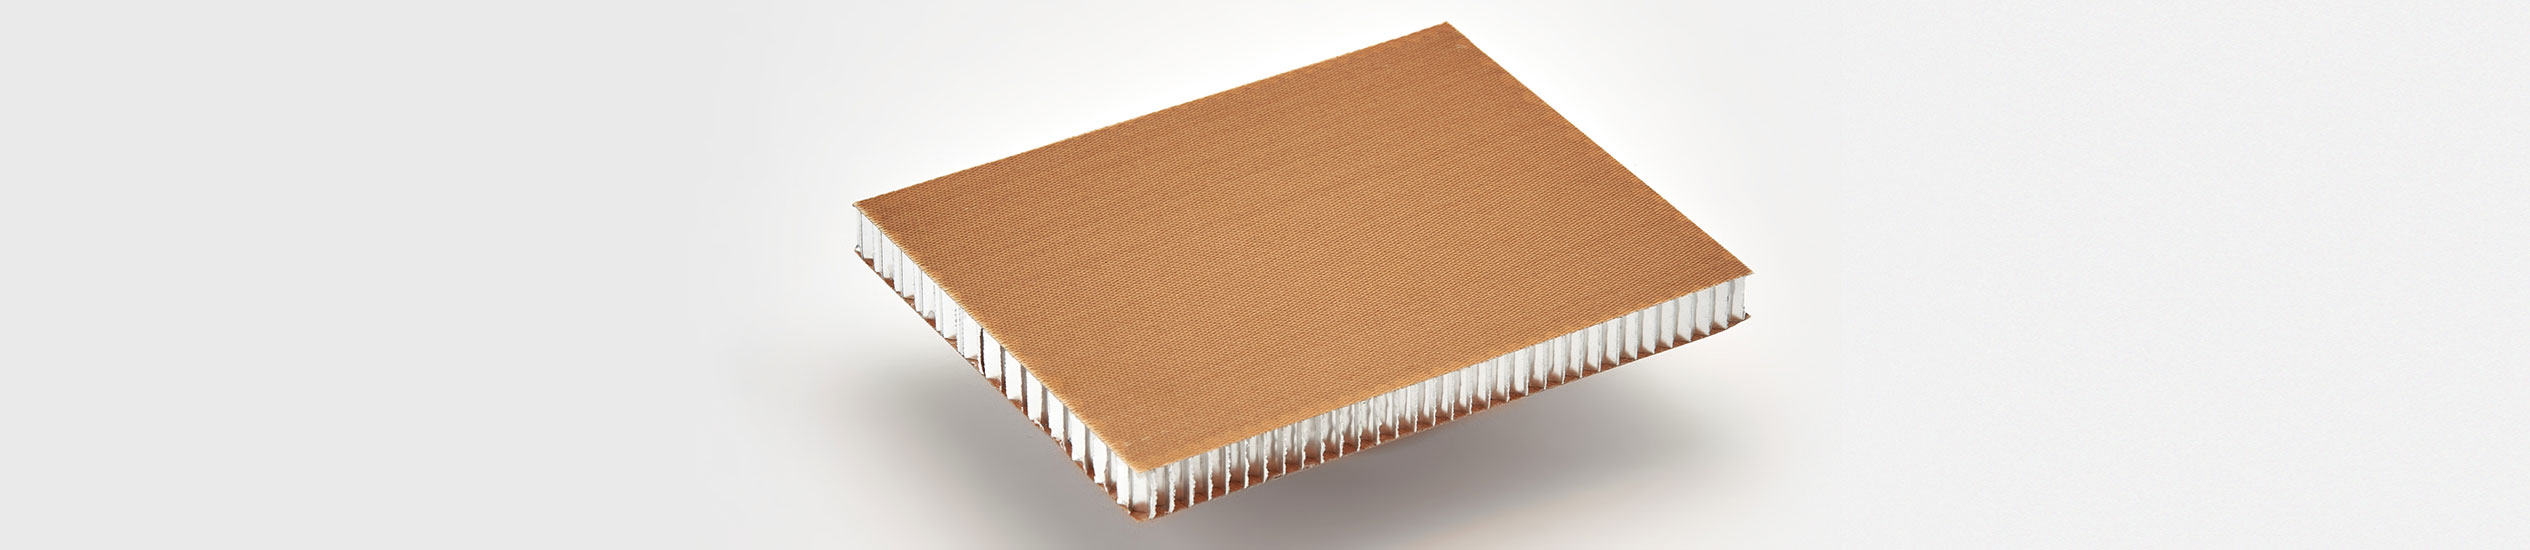 ALUSTEP® F is a lightweight sandwich panel with a core in aluminium honeycomb with glass fiber reinforced with phenolic resin.